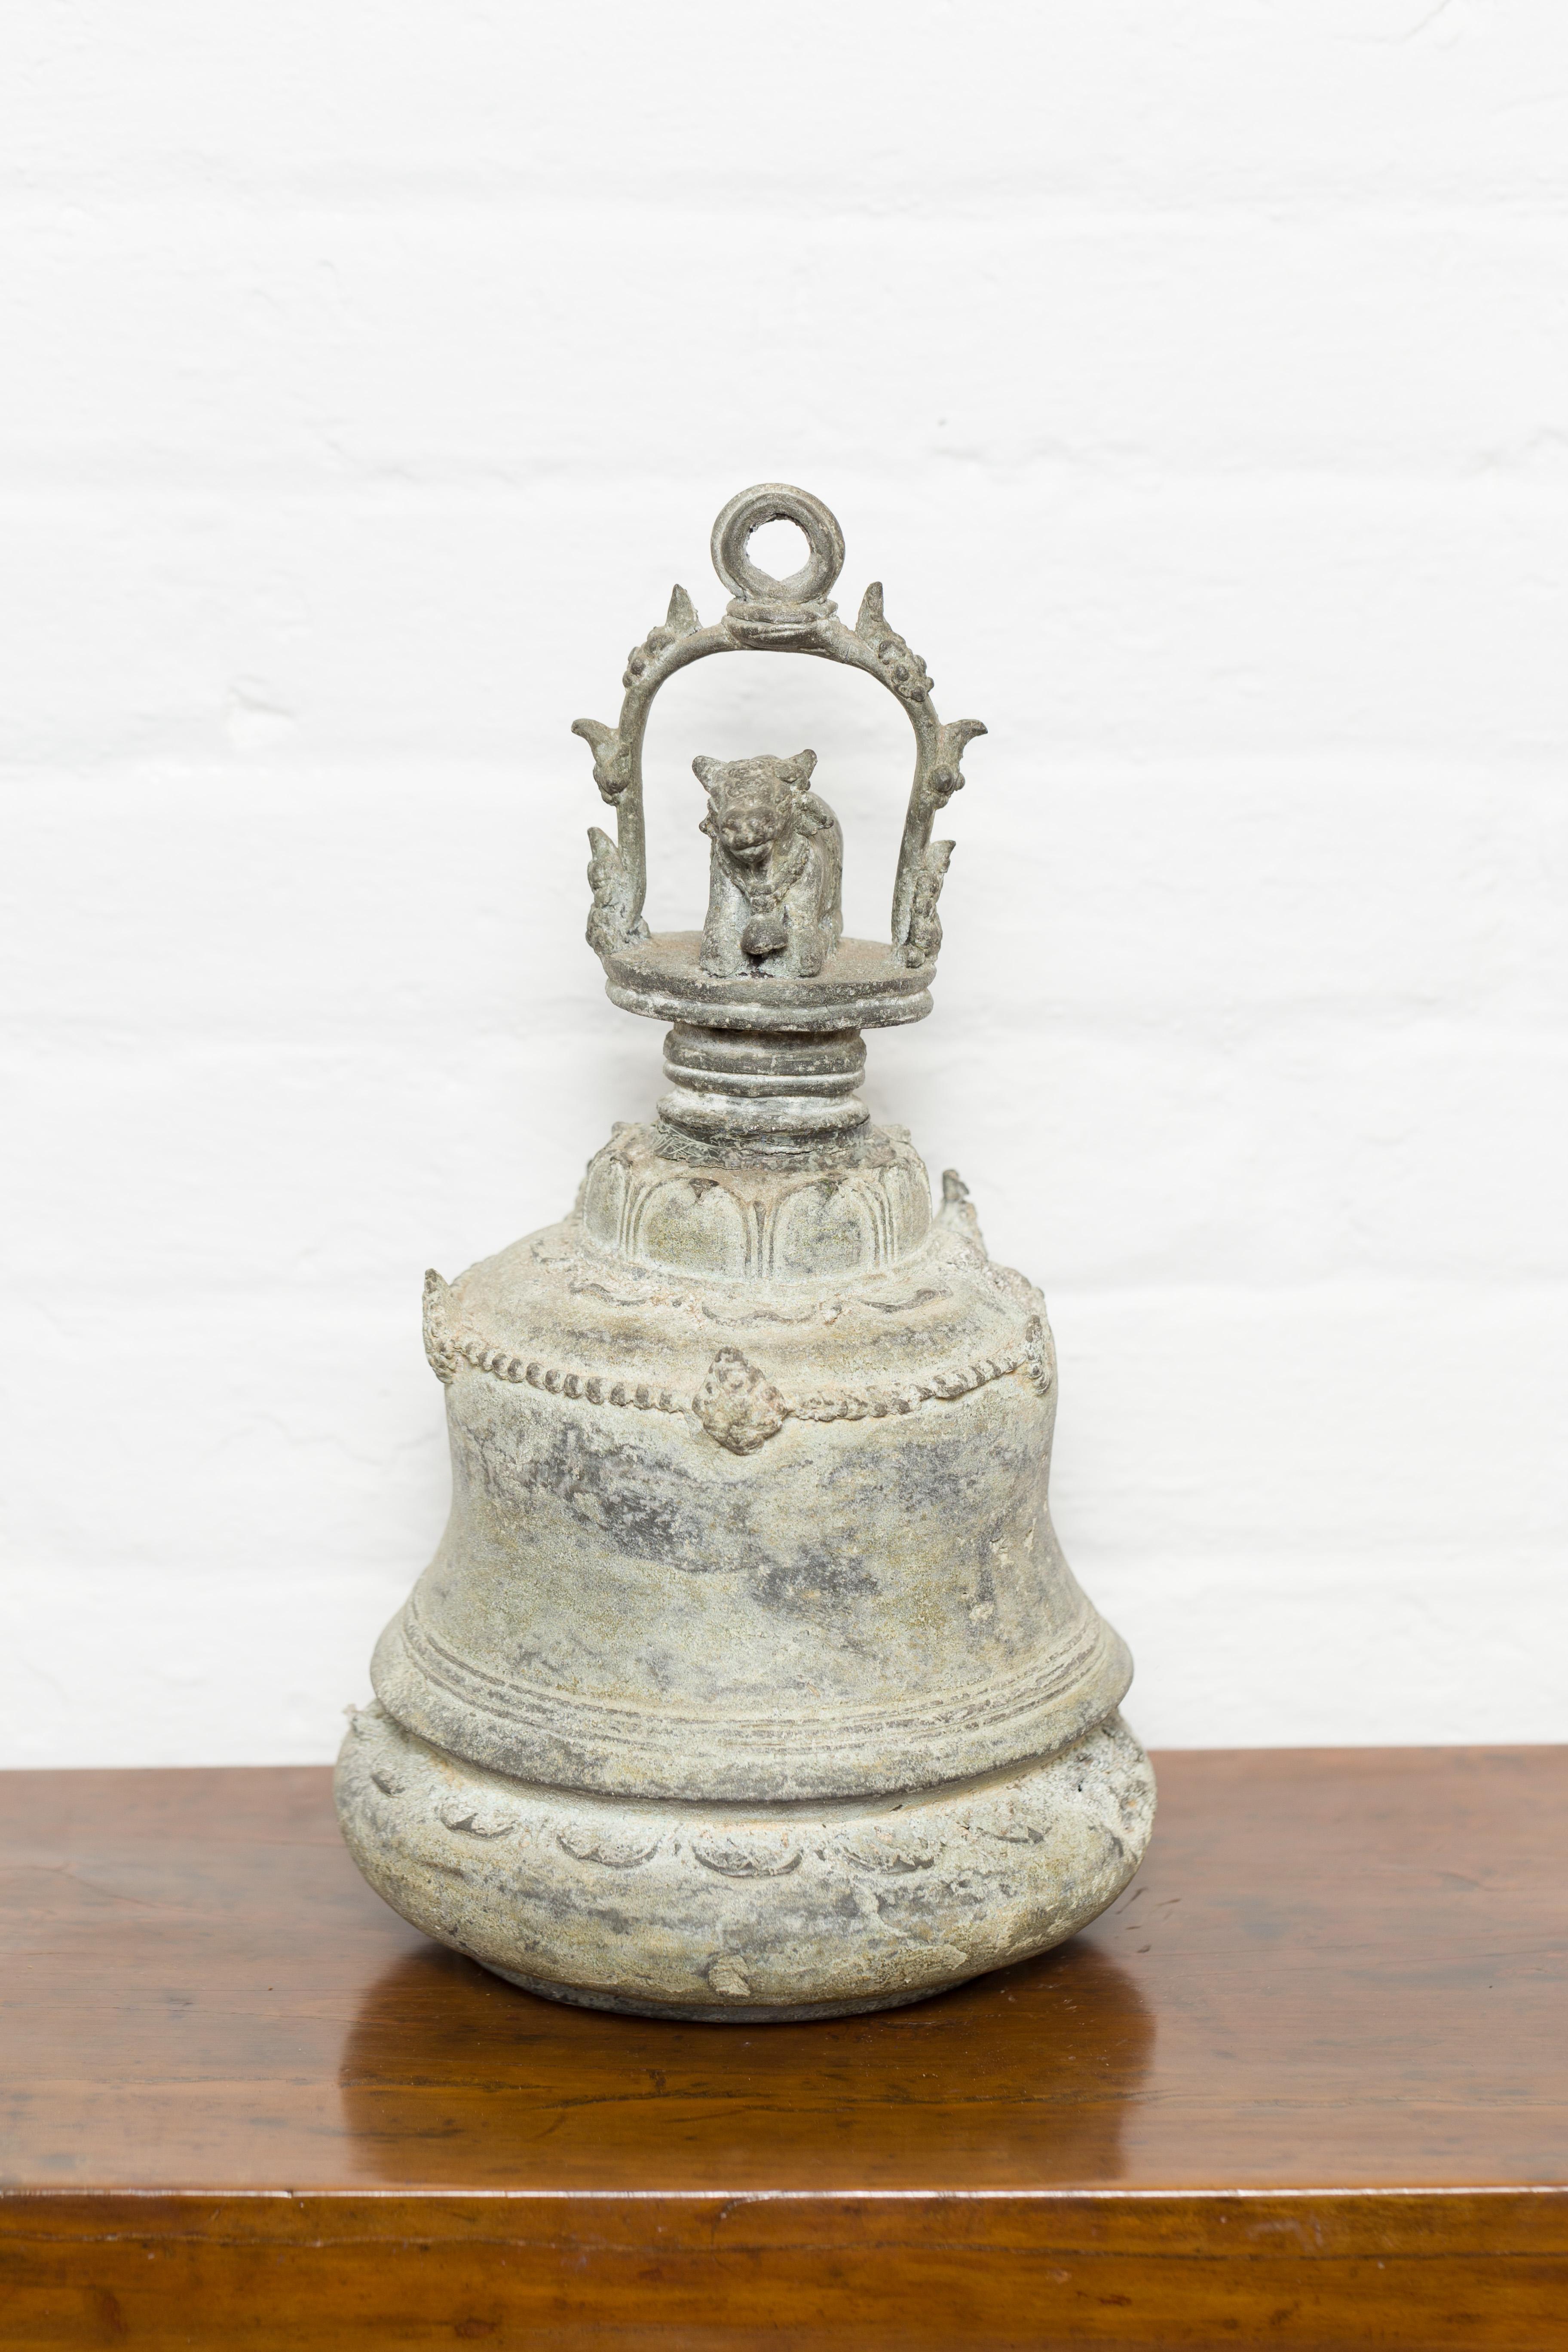 An antique Burmese bronze ceremonial bell from the 19th century with verde patina and cow motif. Created in Burma during the 19th century, this bronze ceremonial bell will make for an excellent decorative object. Boasting a verde patina with nicely